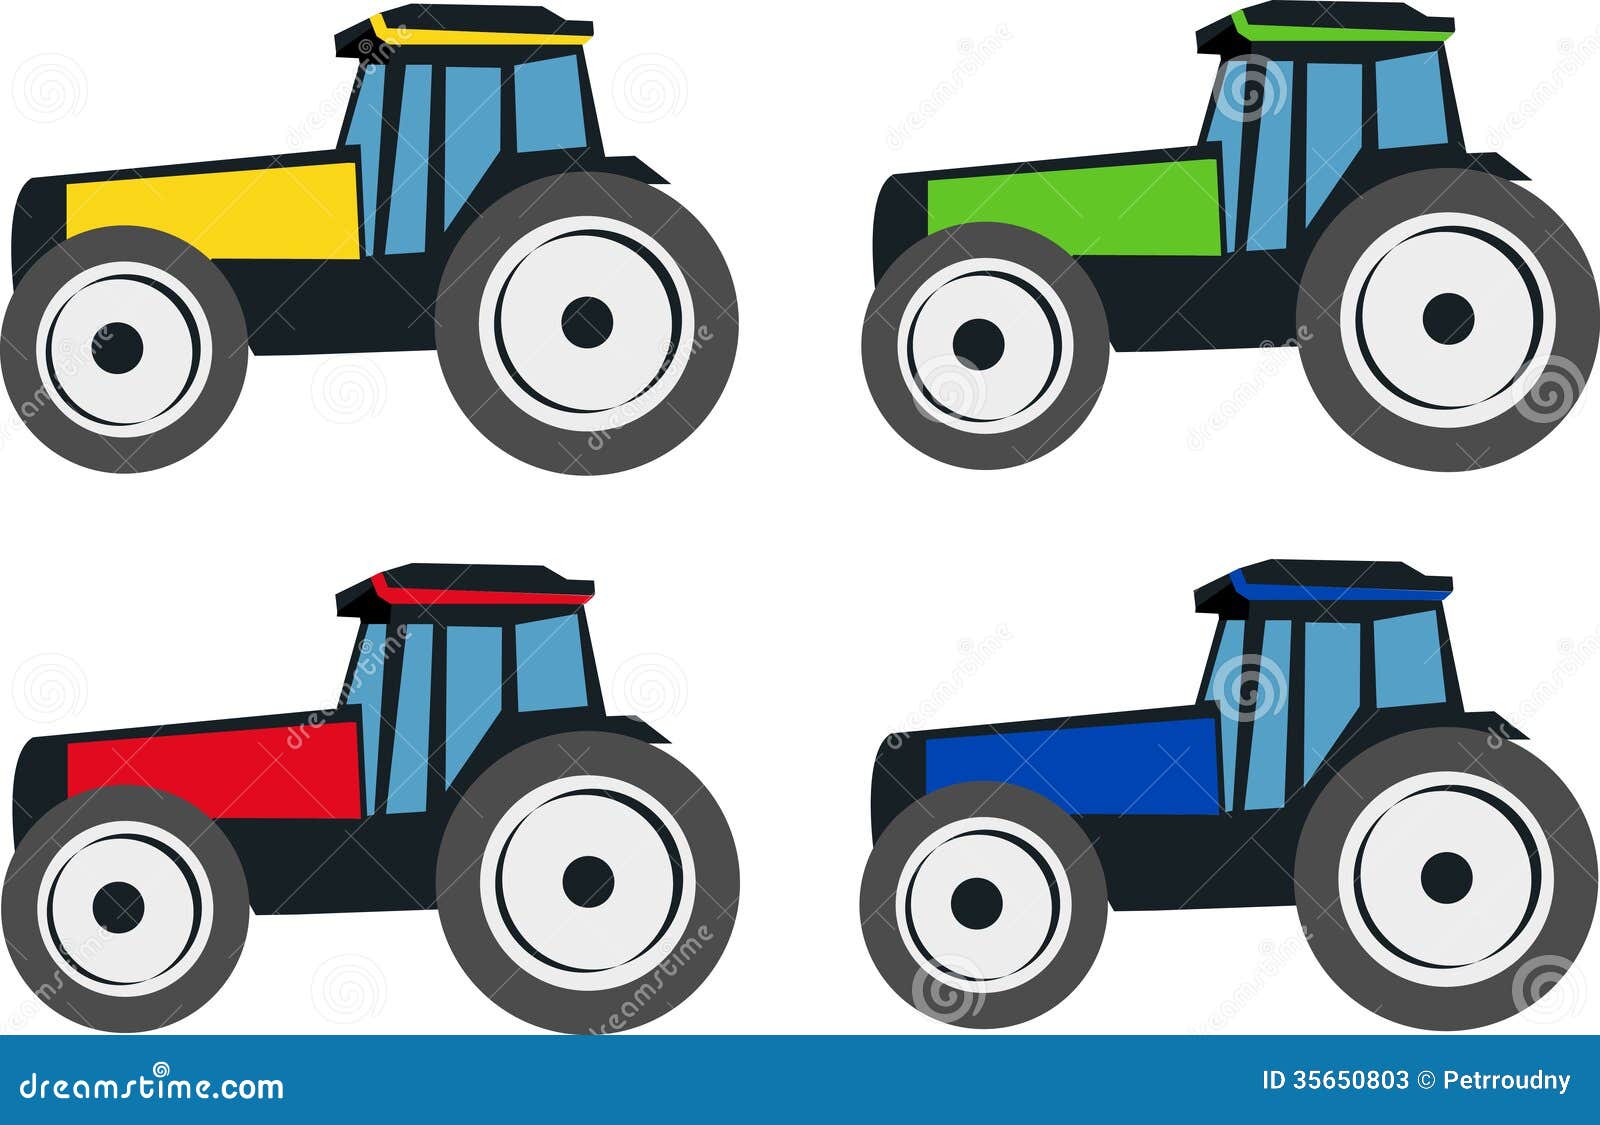 green tractor clipart - photo #49